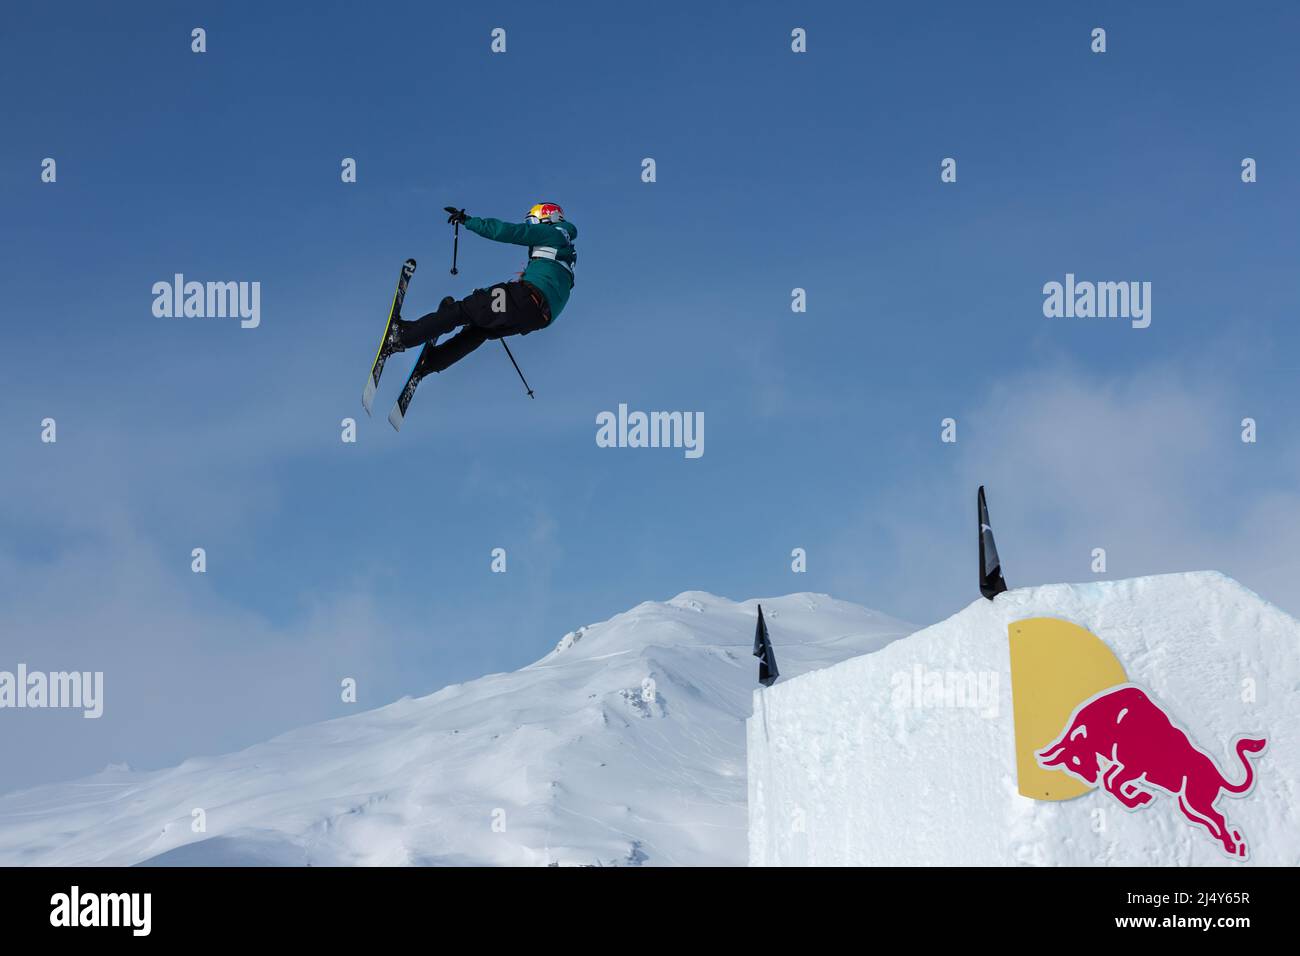 Athlete flies off ski jump with Red Bull advertisement Stock Photo